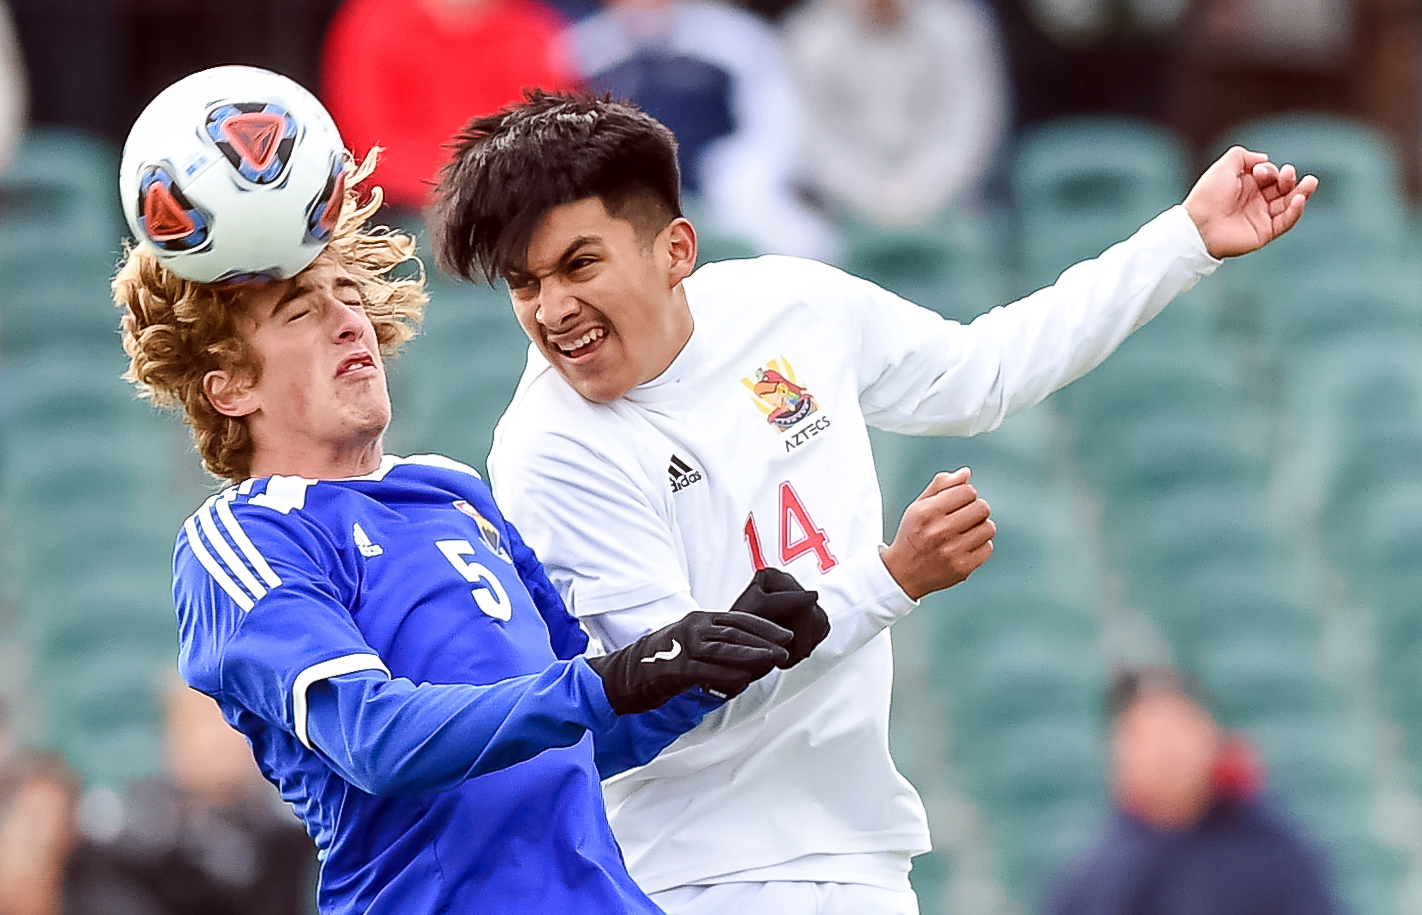 Priory's Steven Virtel (5) wons a head ball over Guadalupe Centers' Rodrigo Caballero during the MSHSAA Class 2 boys championship soccer game on Nov. 23, 2019, at World Wide Technology Soccer Park in Fenton.